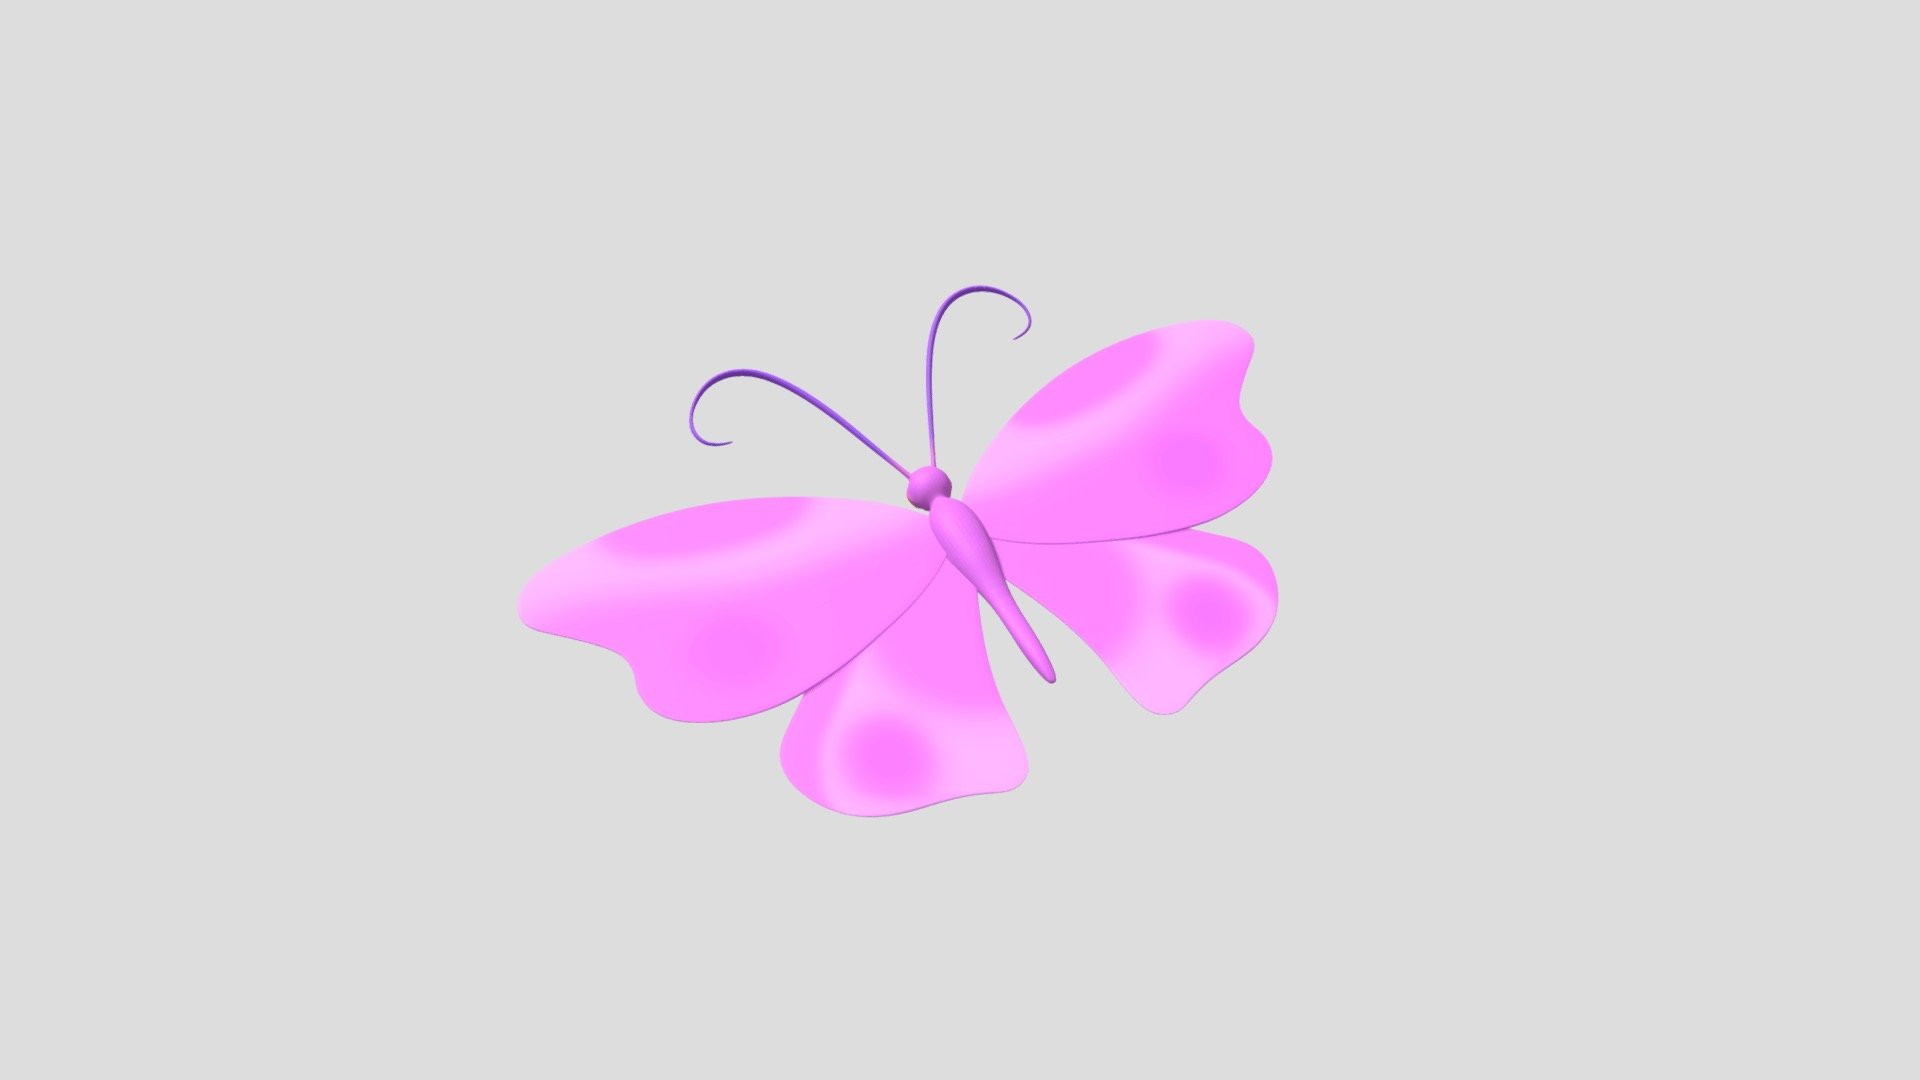 Textures: 1024x1024

Subdivision: 2

Materials 2:
Wings
Body

Rigged

Shapes:

Tongue: Straight/Rolled Tongue.

I hope you enjoy the model 3d model